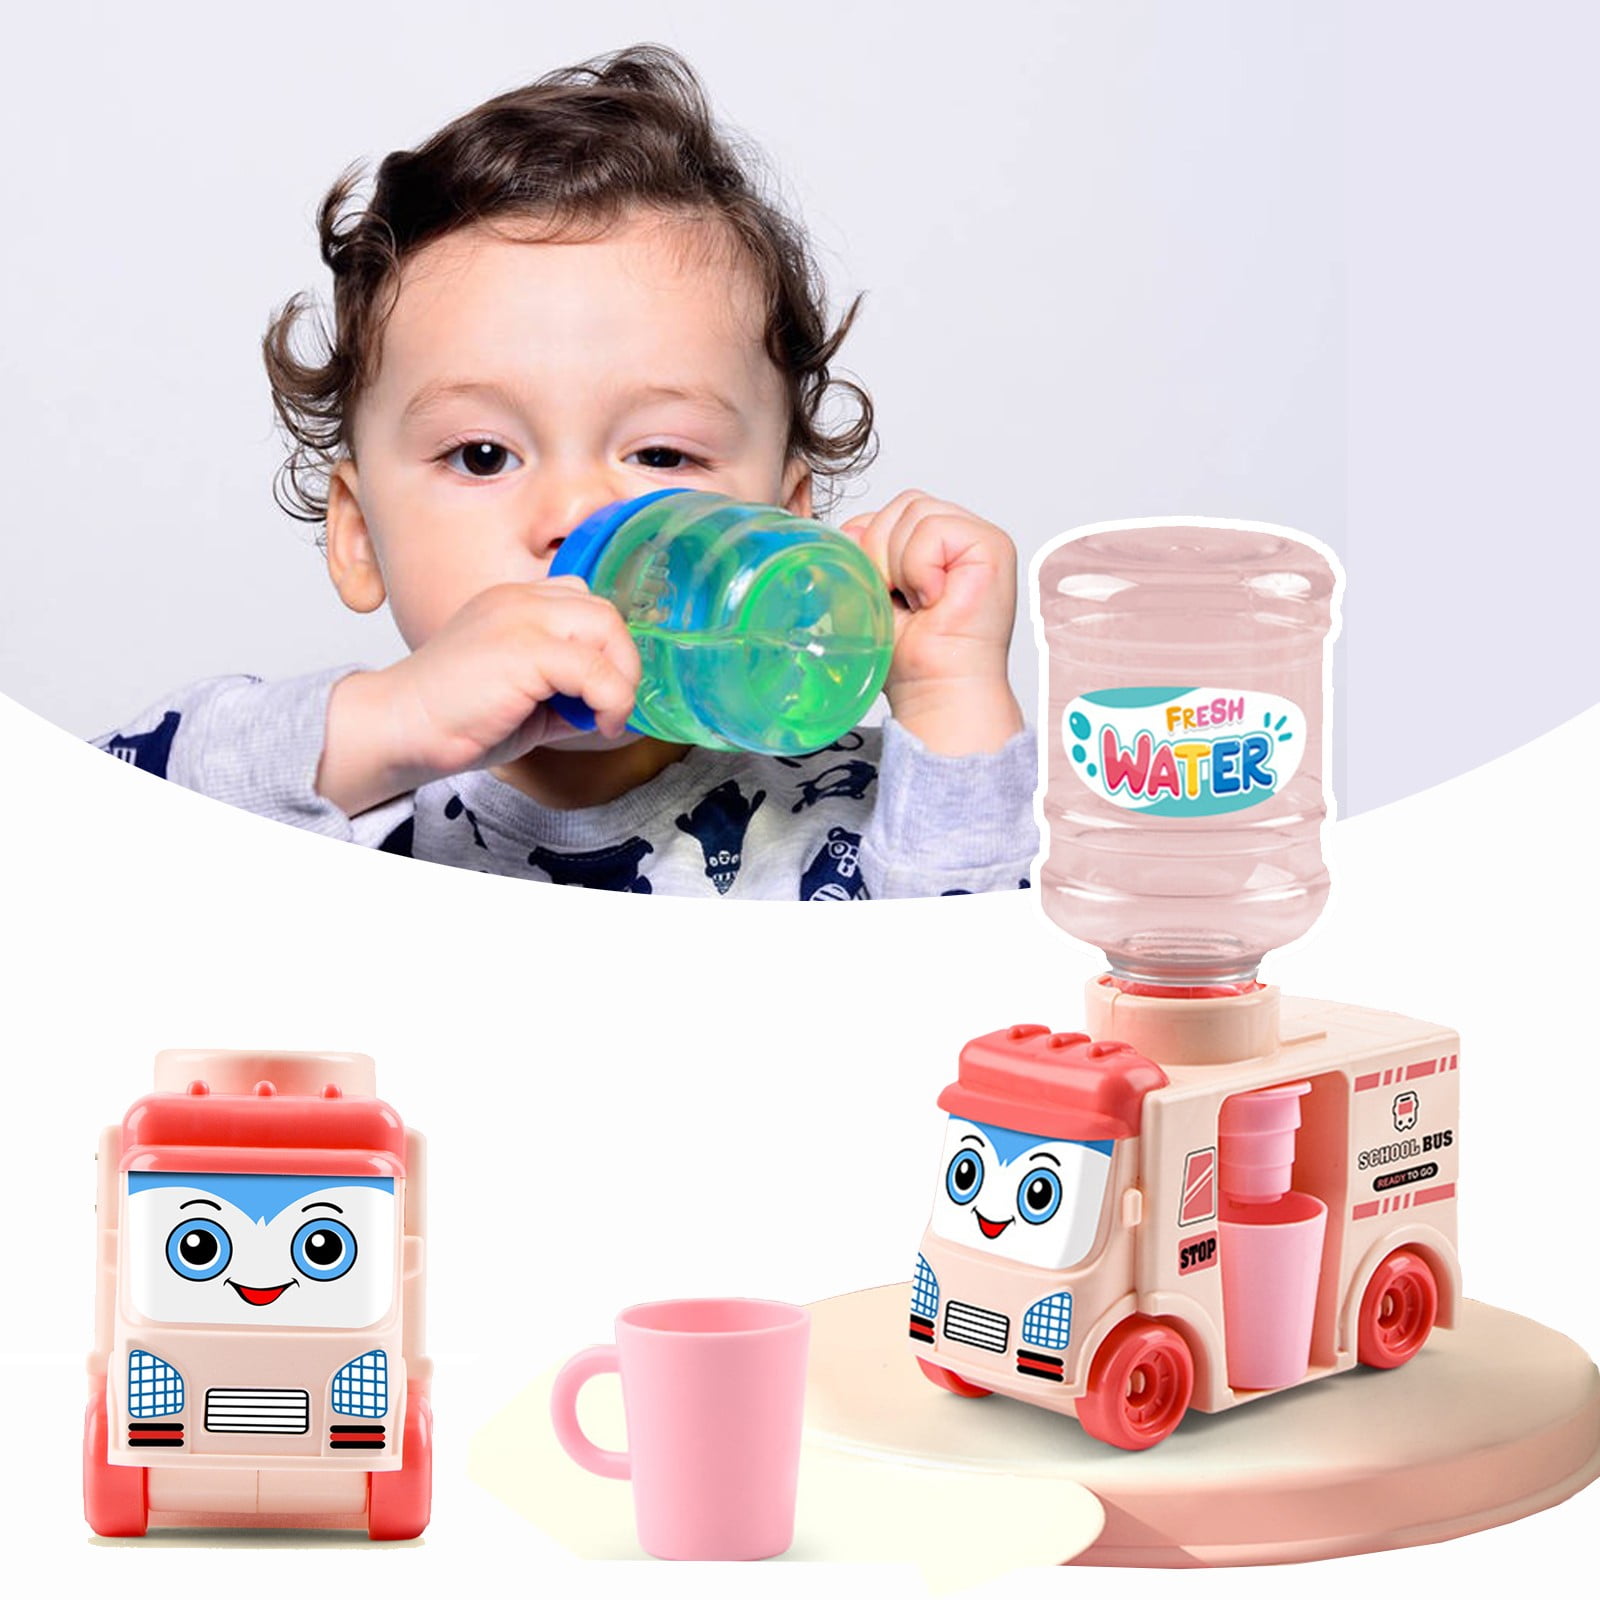 Mittory Water Dispenser Toy, Mini Plastic Cartoon Drink Water Dispenser  With Water Storage Bucket And Cup Funny Kitchen Toy For Children -  